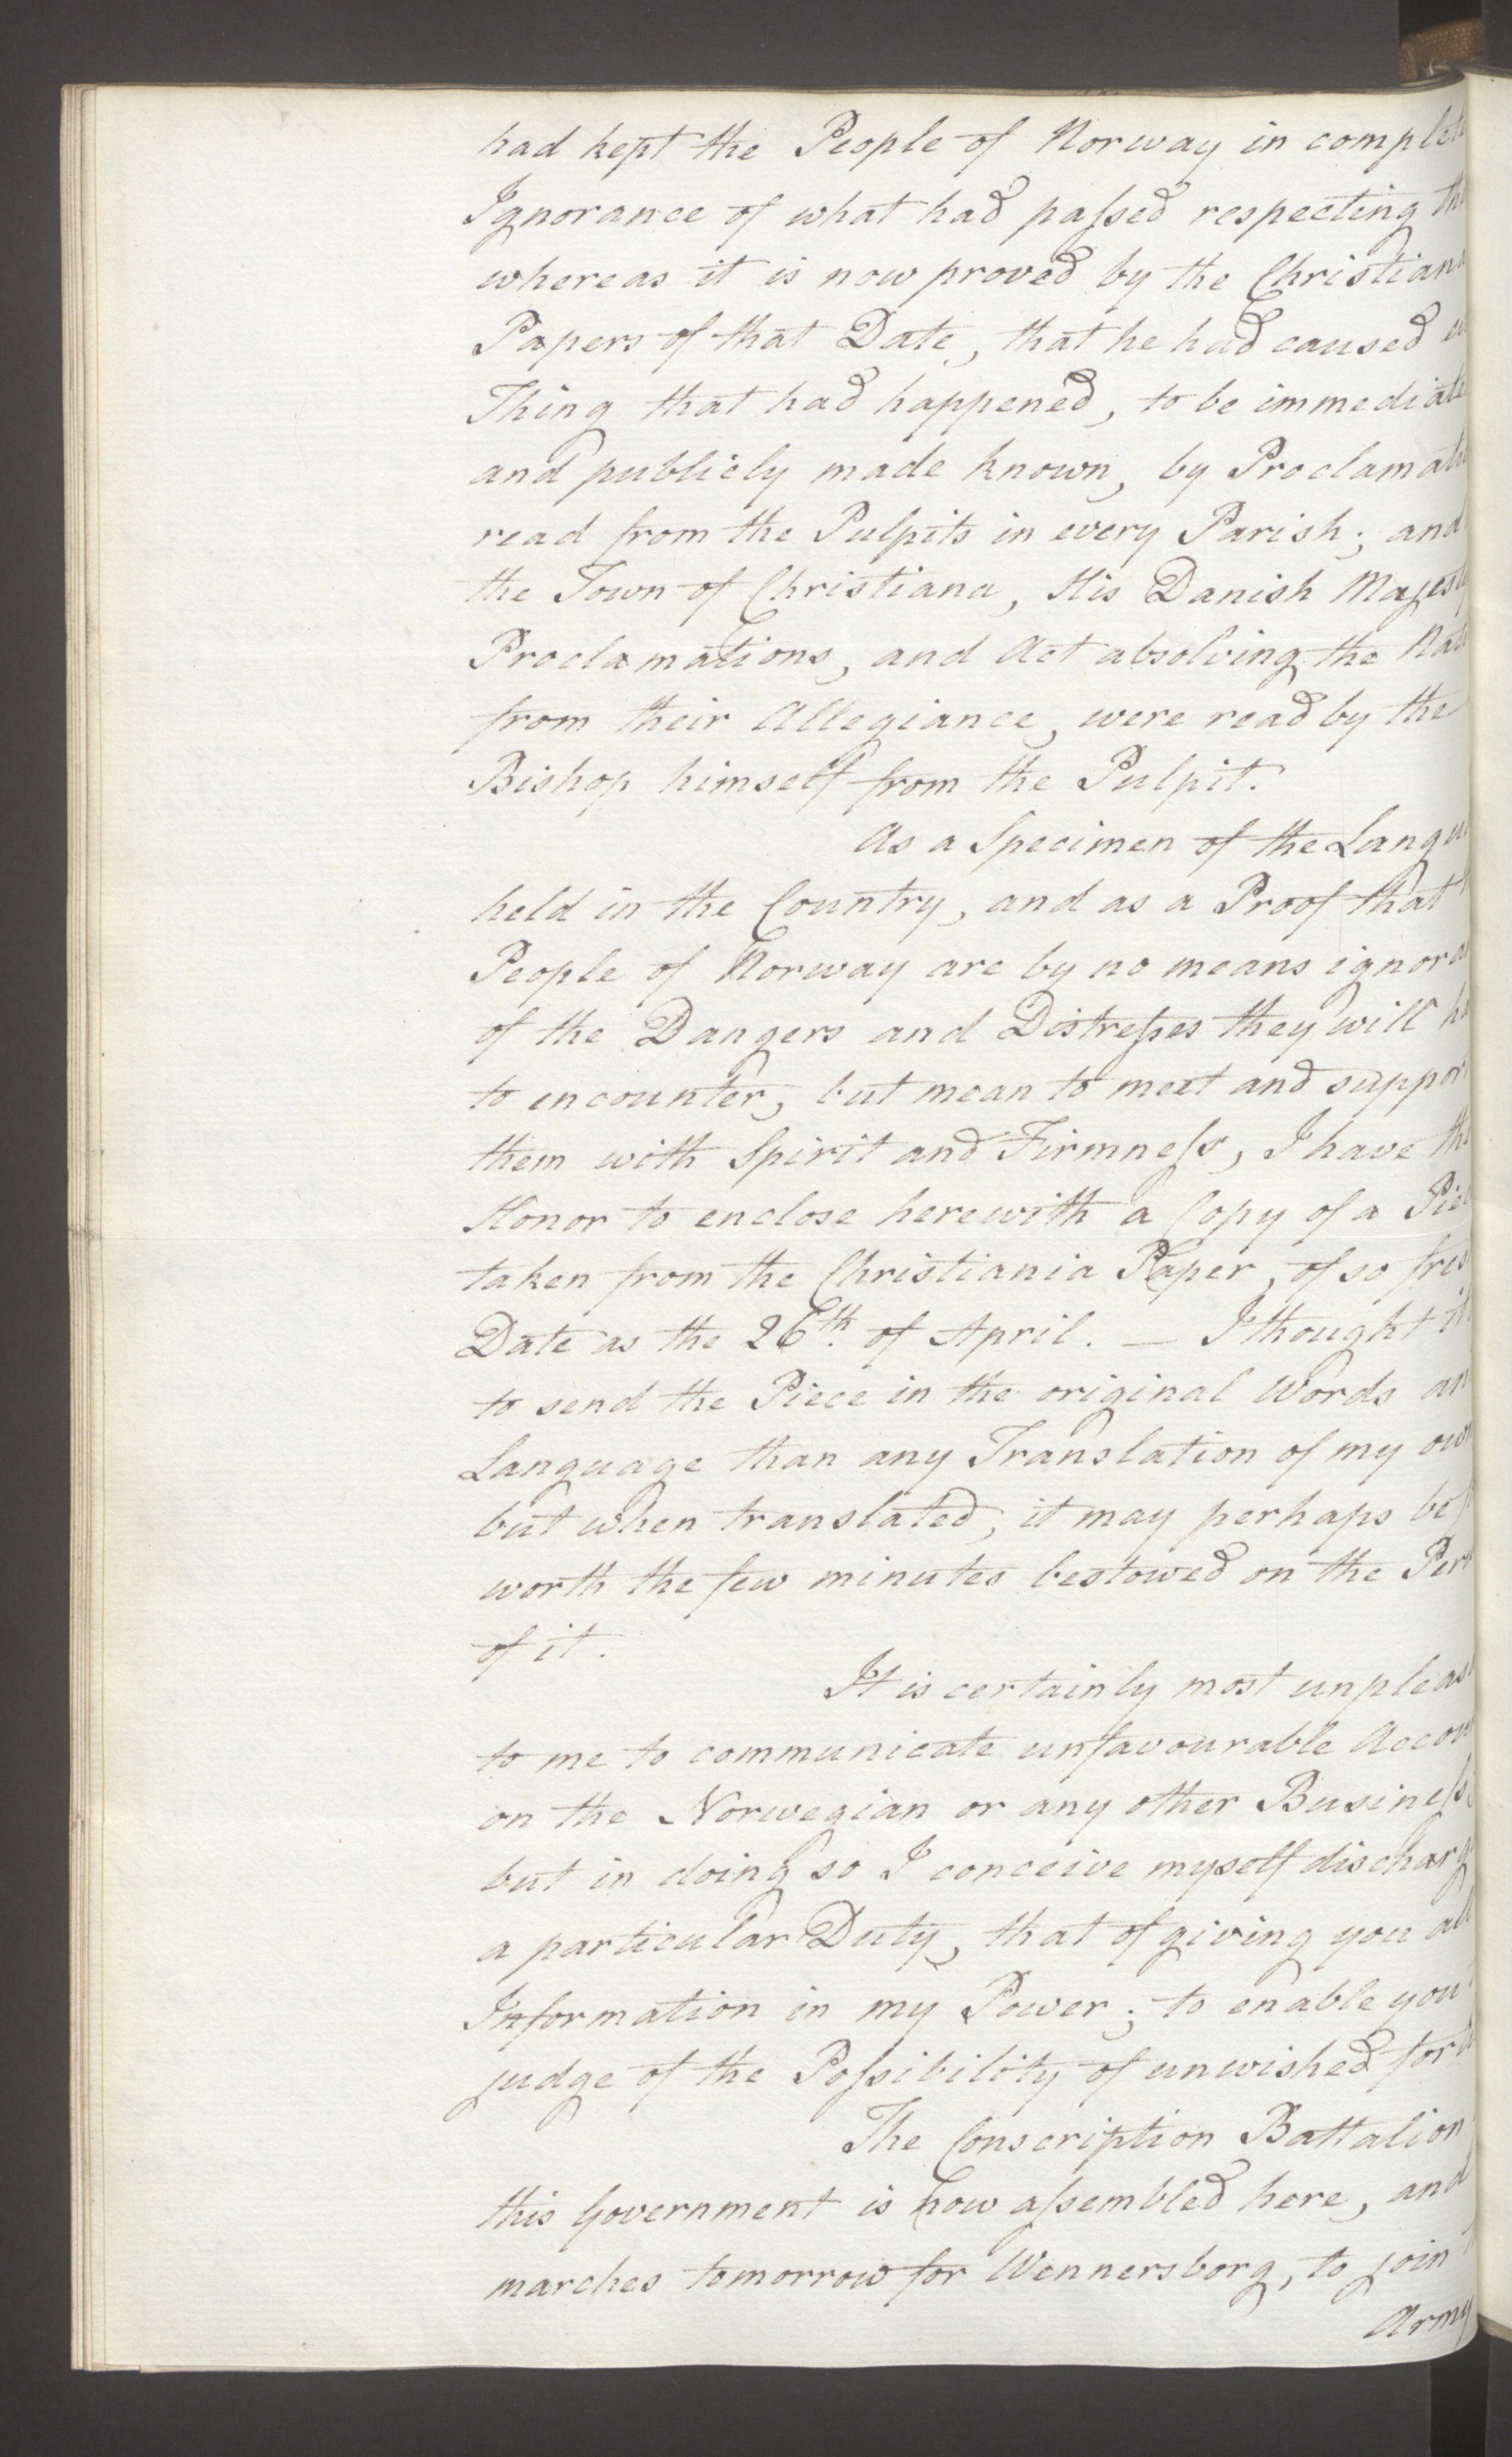 Foreign Office*, UKA/-/FO 38/16: Sir C. Gordon. Reports from Malmö, Jonkoping, and Helsingborg, 1814, s. 46